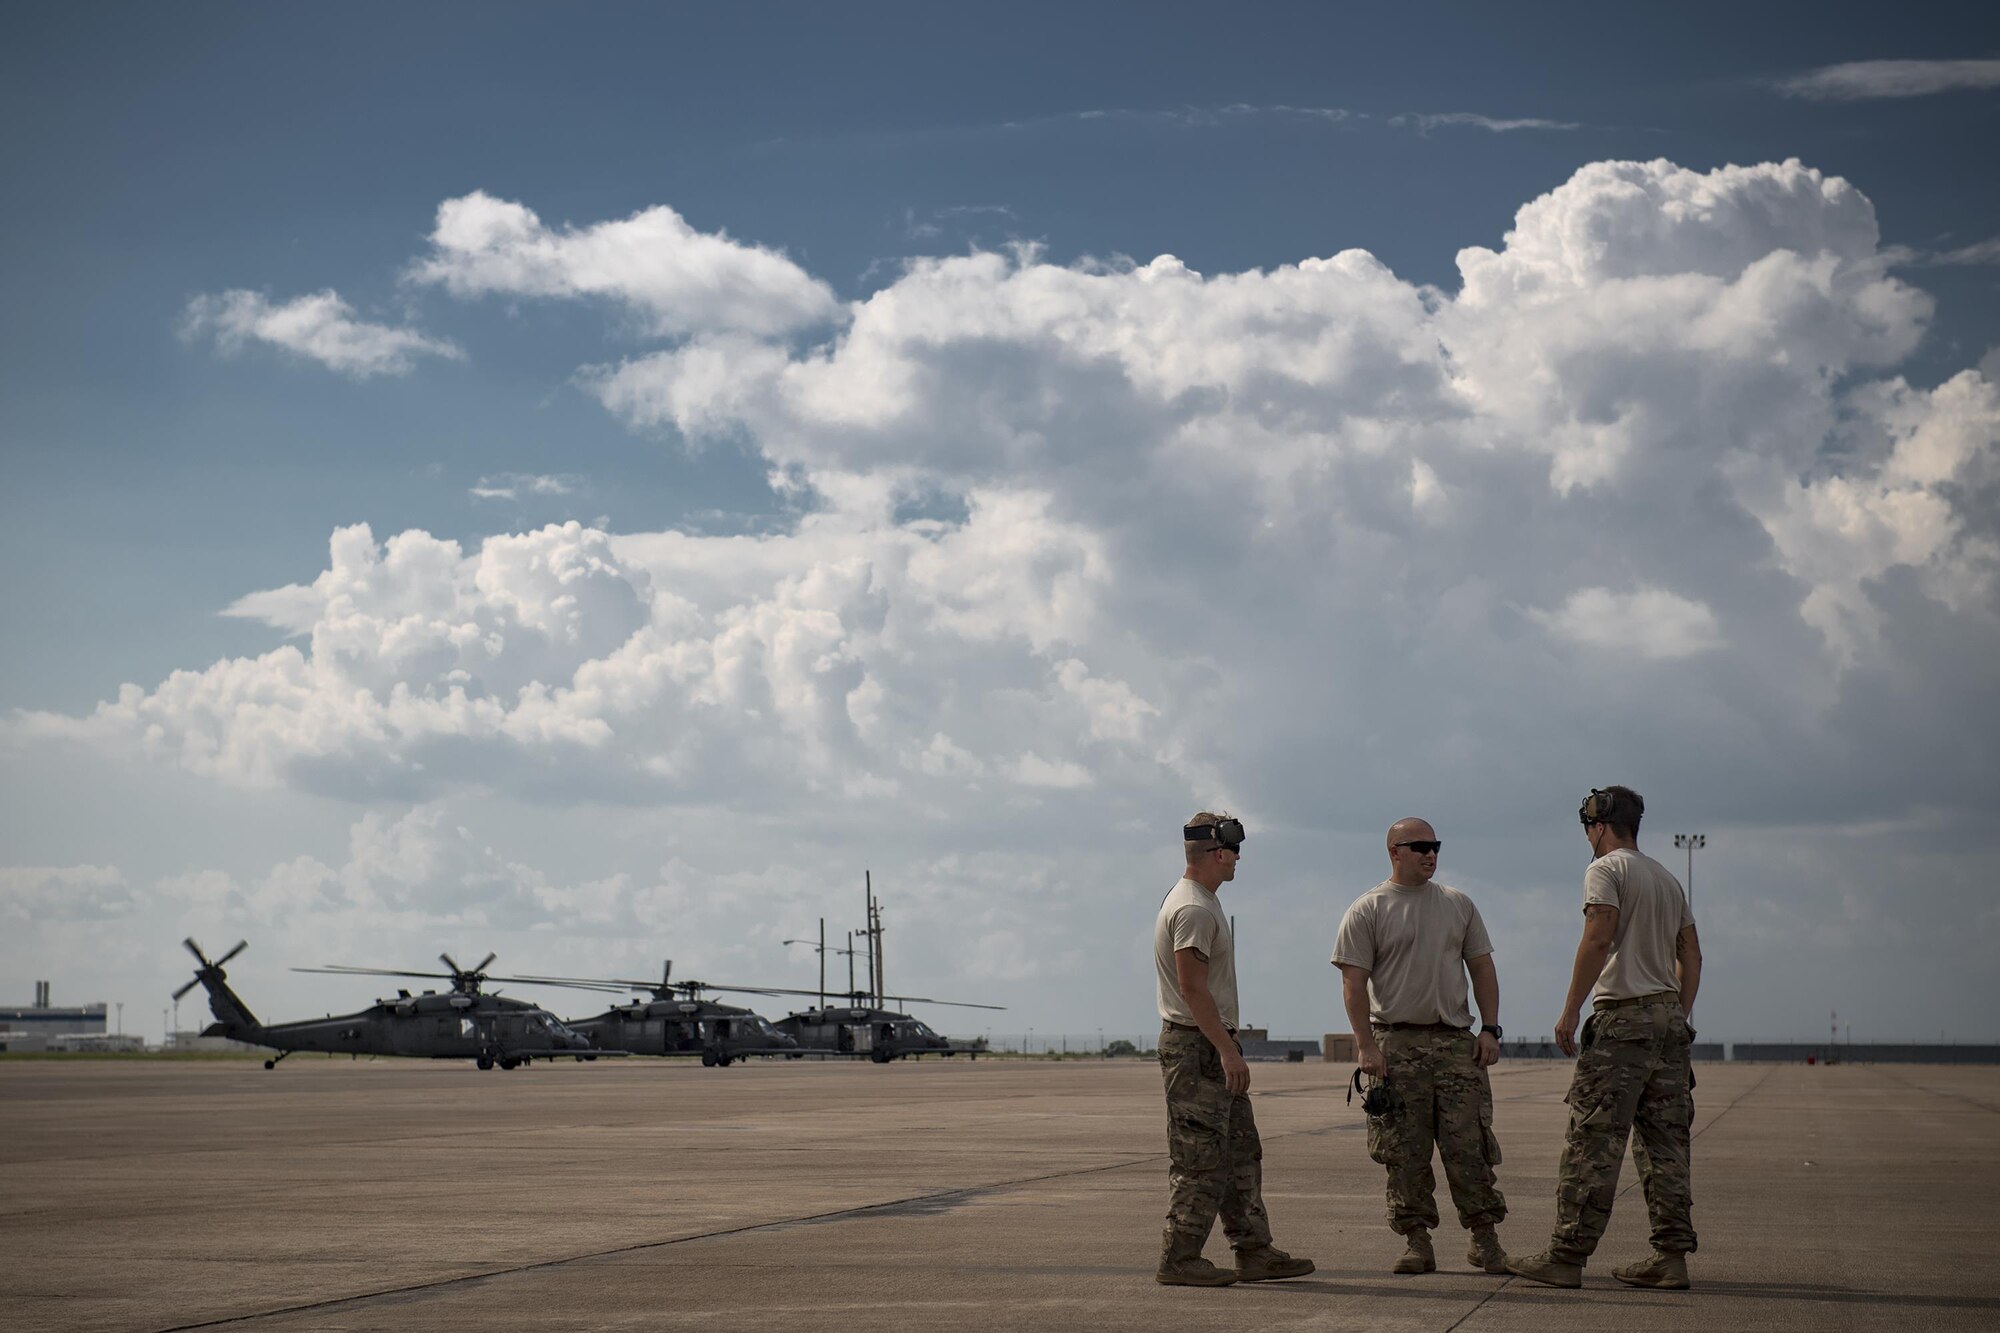 Maintainers from the 41st Helicopter Maintenance Unit huddle on the flightline line, Aug. 28, 2017, at Naval Air Station Fort Worth Joint Reserve Base, Texas. The 347th Rescue Group from Moody Air Force Base, Ga. sent aircraft and personnel in support of Air Forces Northern as part of Northern Command's support of FEMA's disaster response efforts. (U.S. Air Force photo by Staff Sgt. Ryan Callaghan)